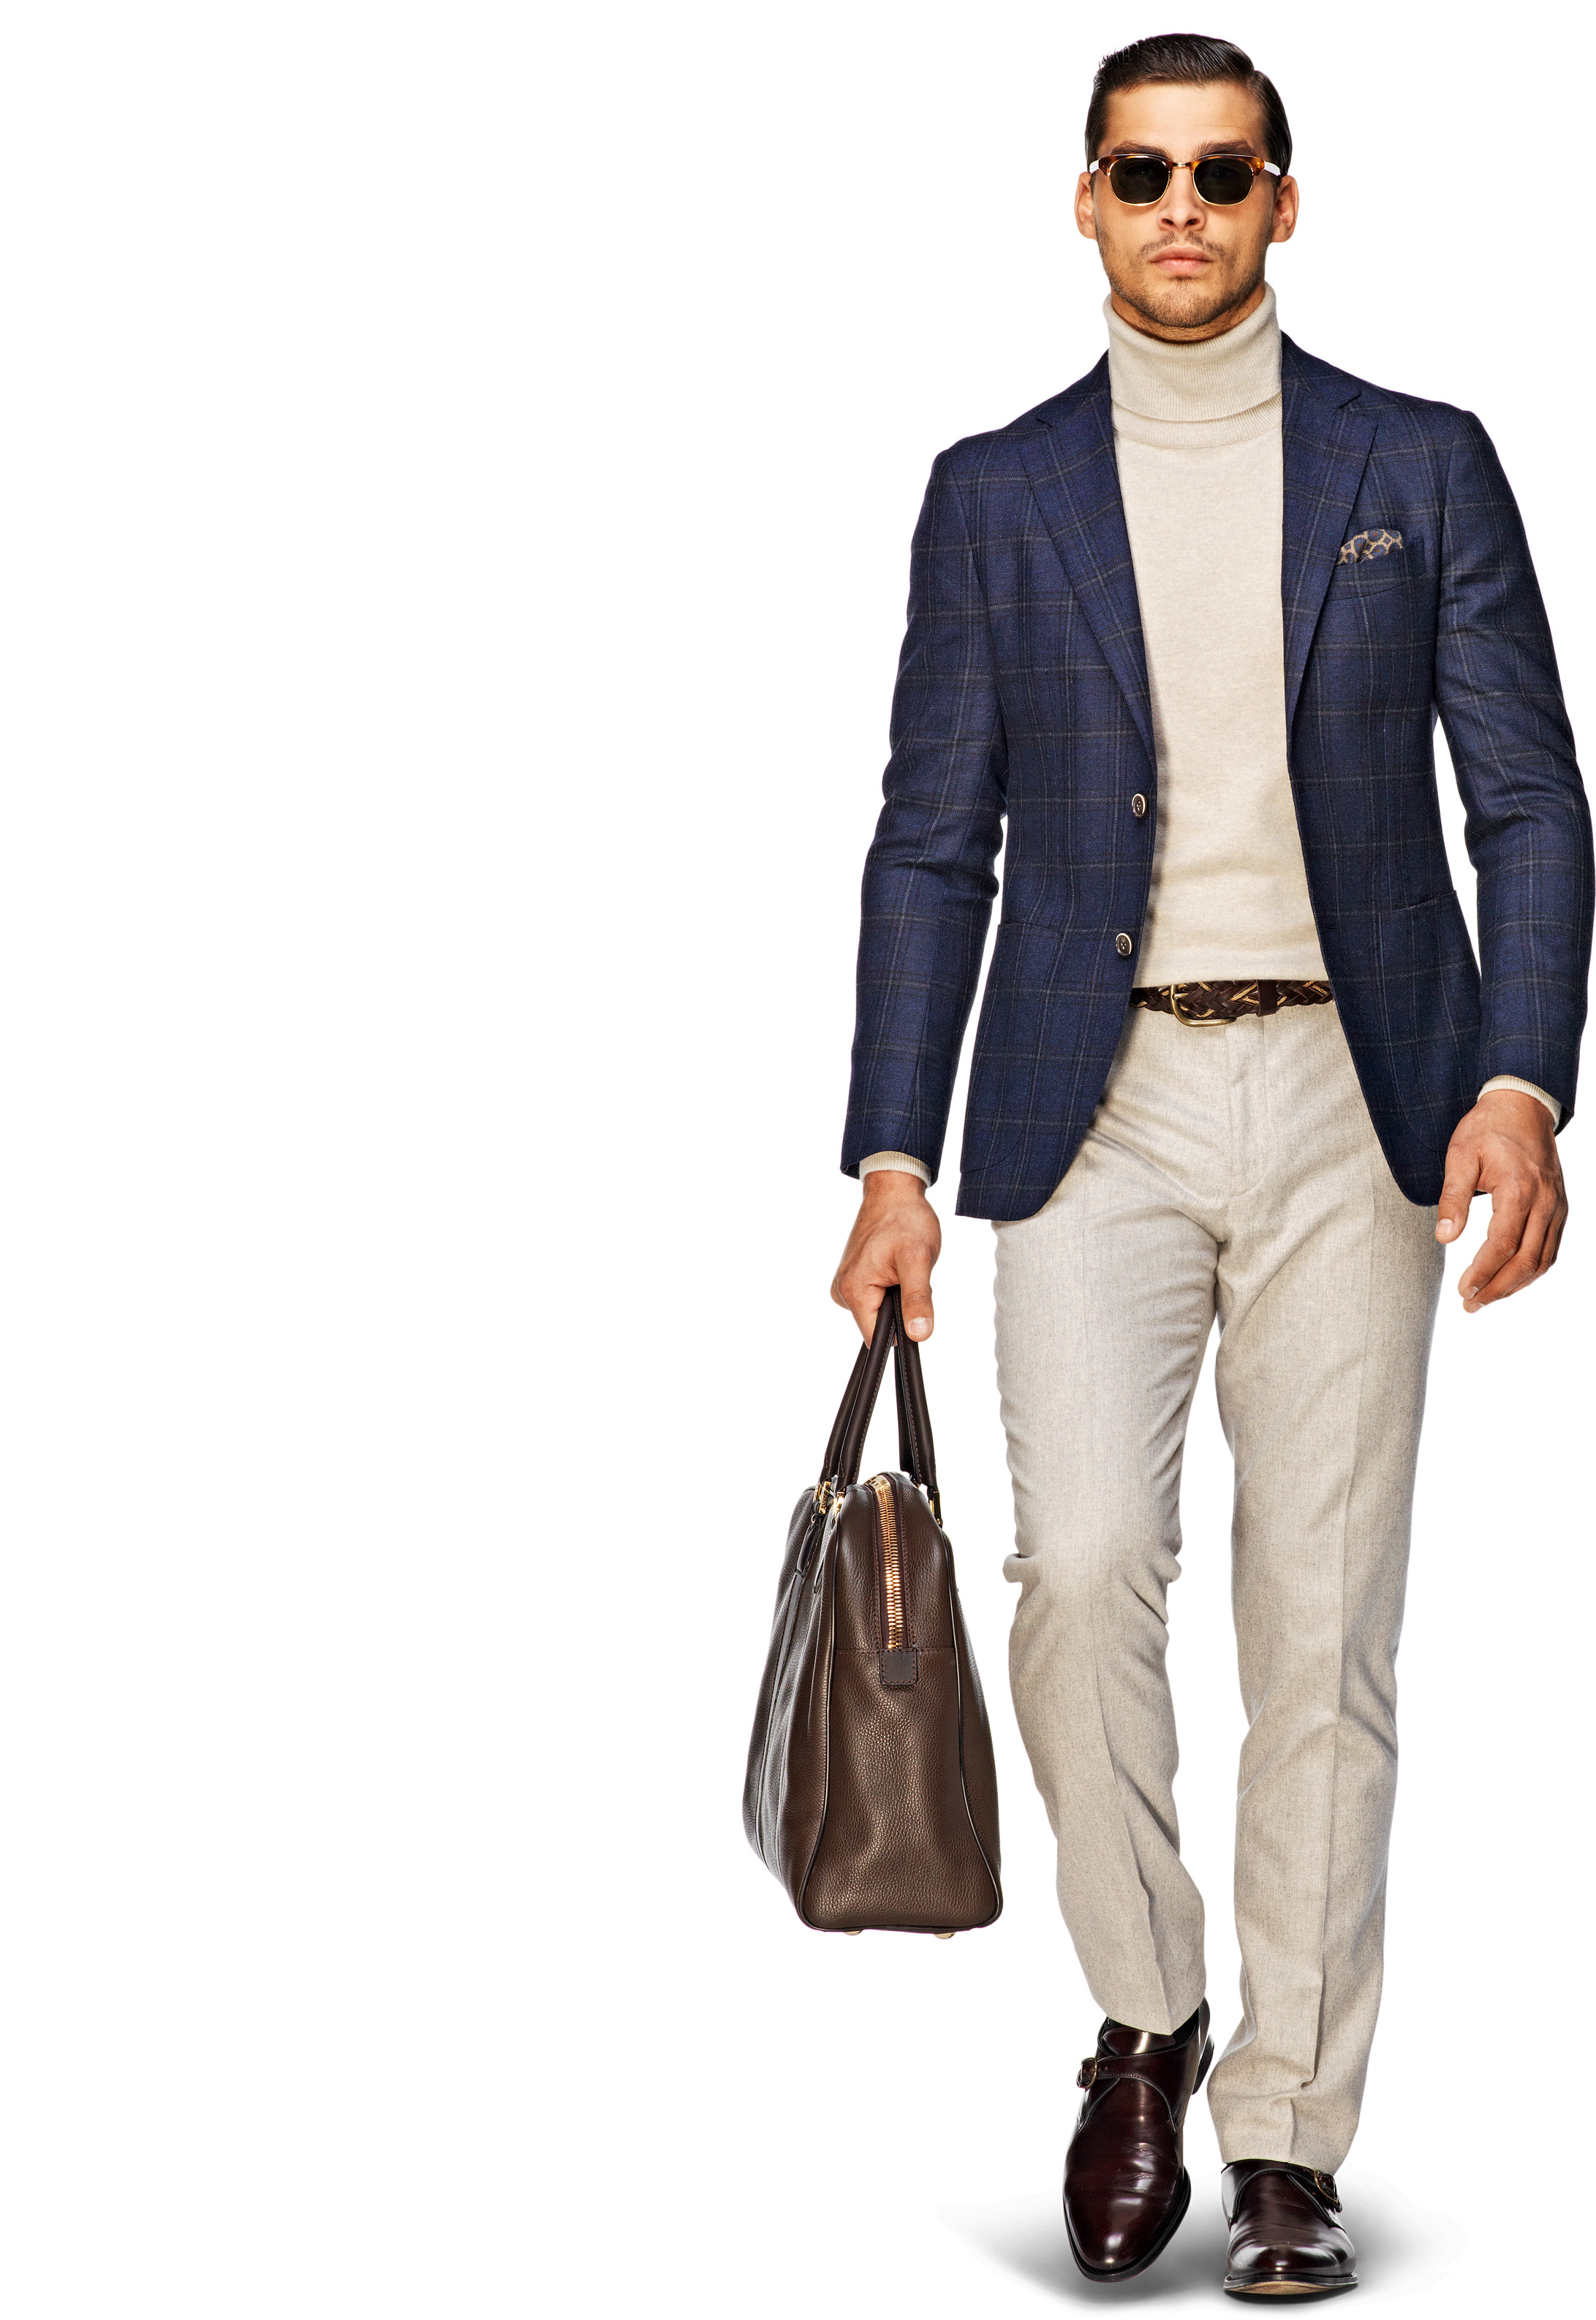 Best and Most Popular Outfits from Man Fashion – careyfashion.com